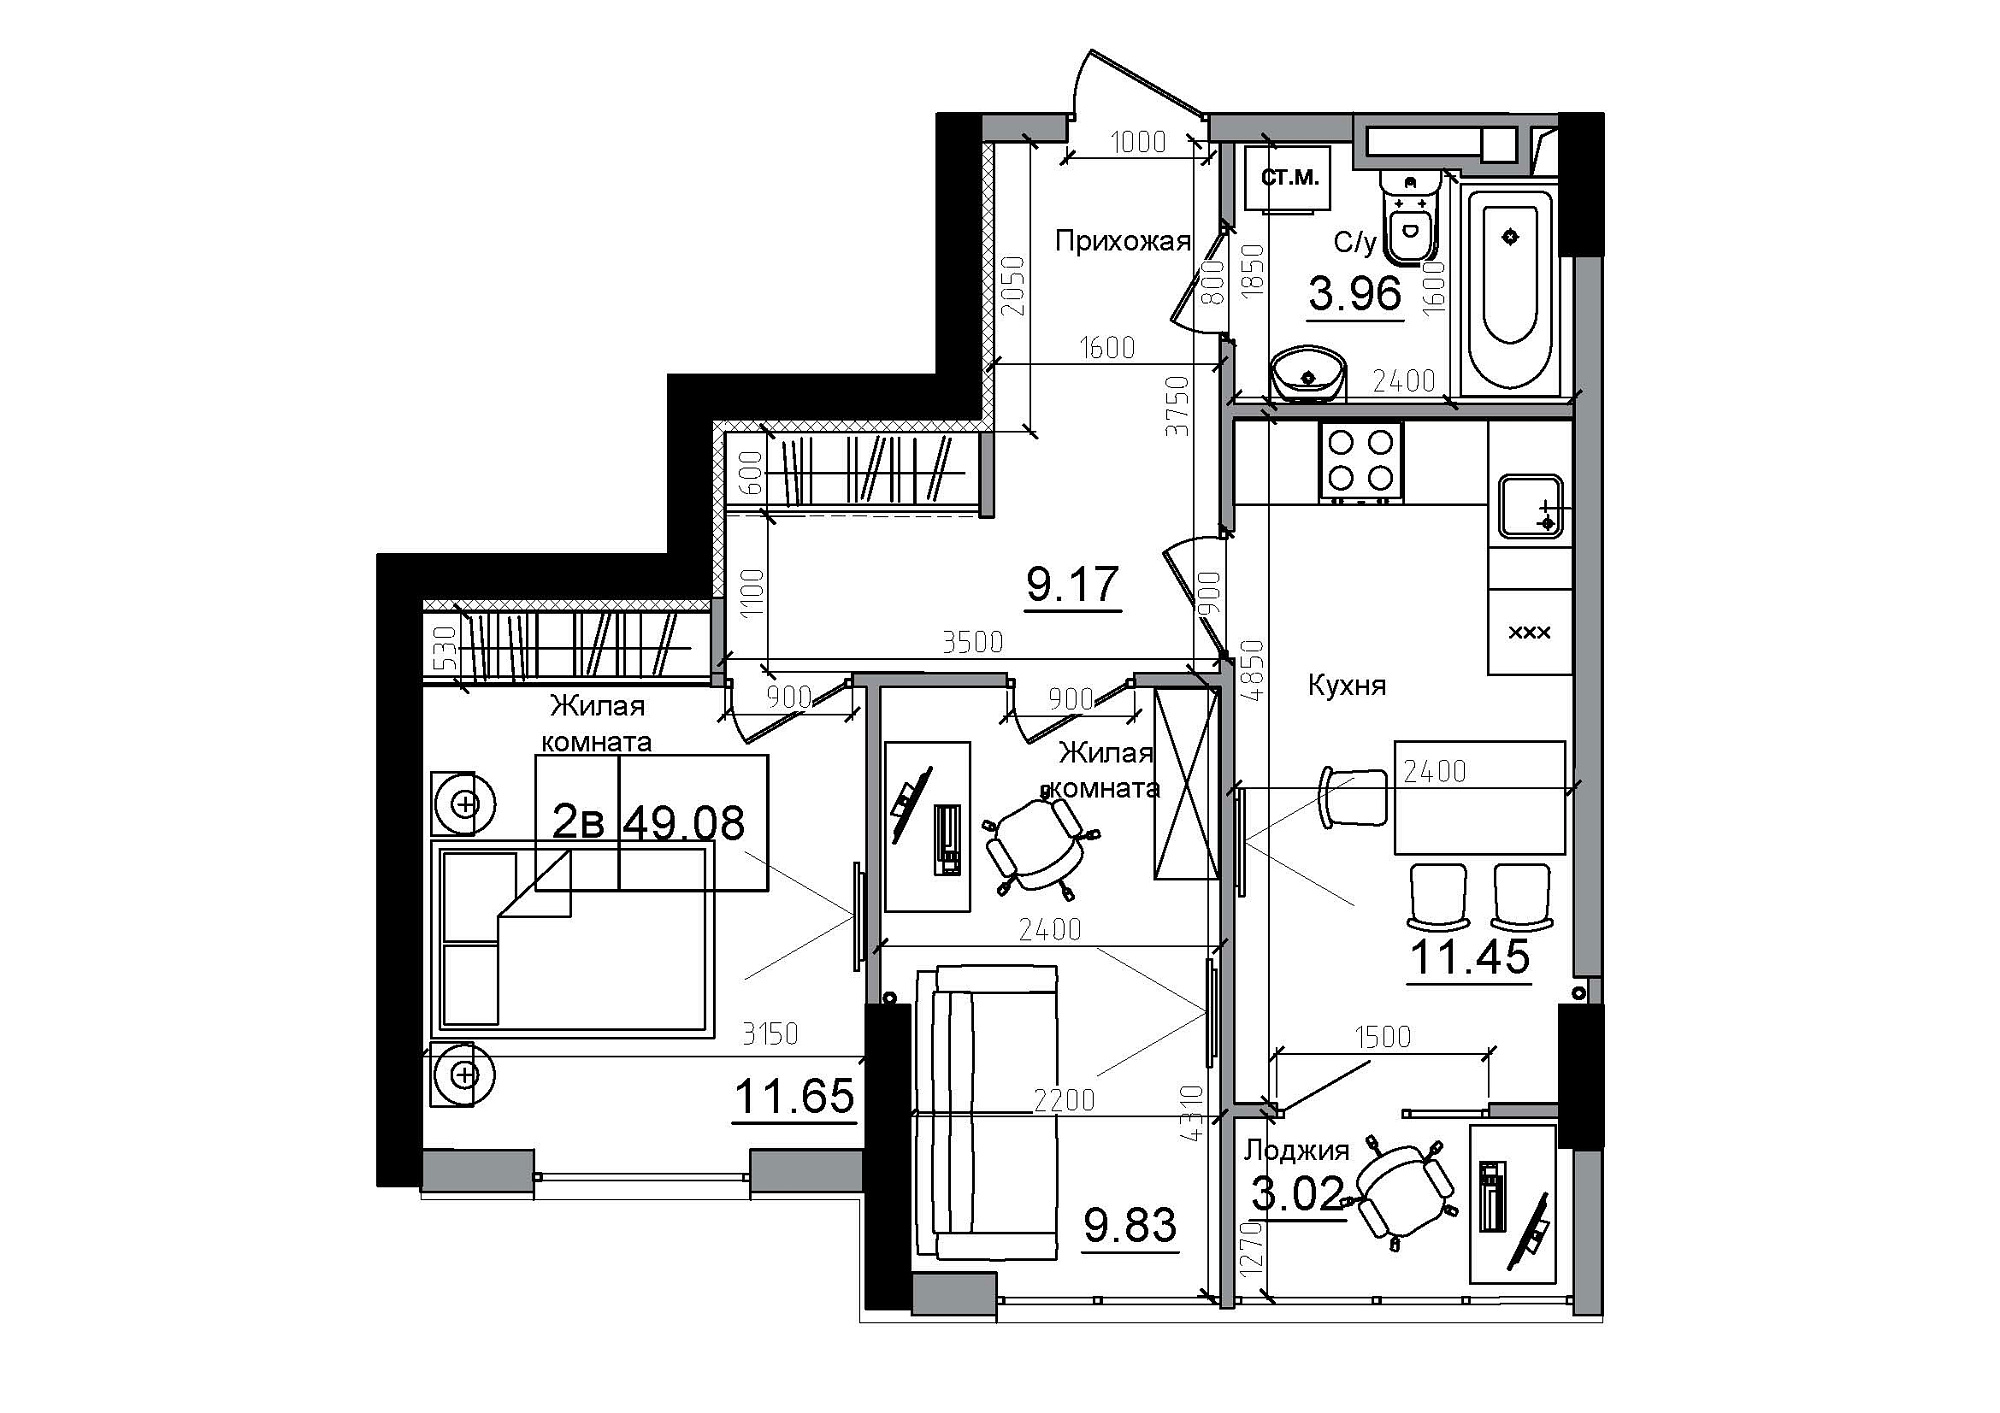 Planning 2-rm flats area 49.08m2, AB-12-07/00015.